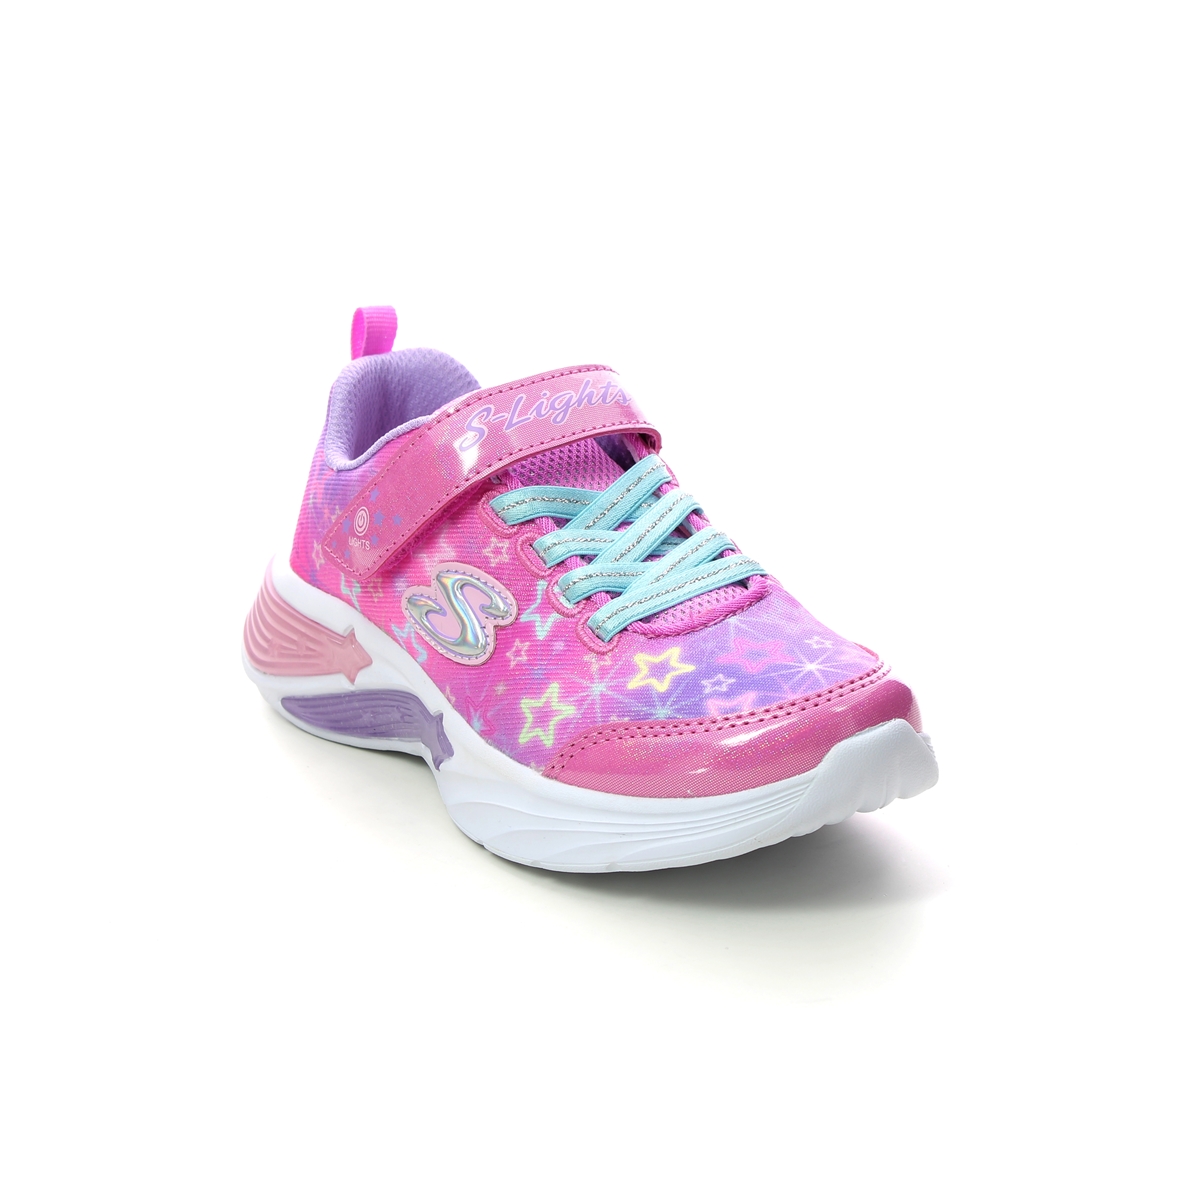 Skechers Star Sparks Pink Kids Girls Trainers 302324L In Size 30 In Plain Pink For kids